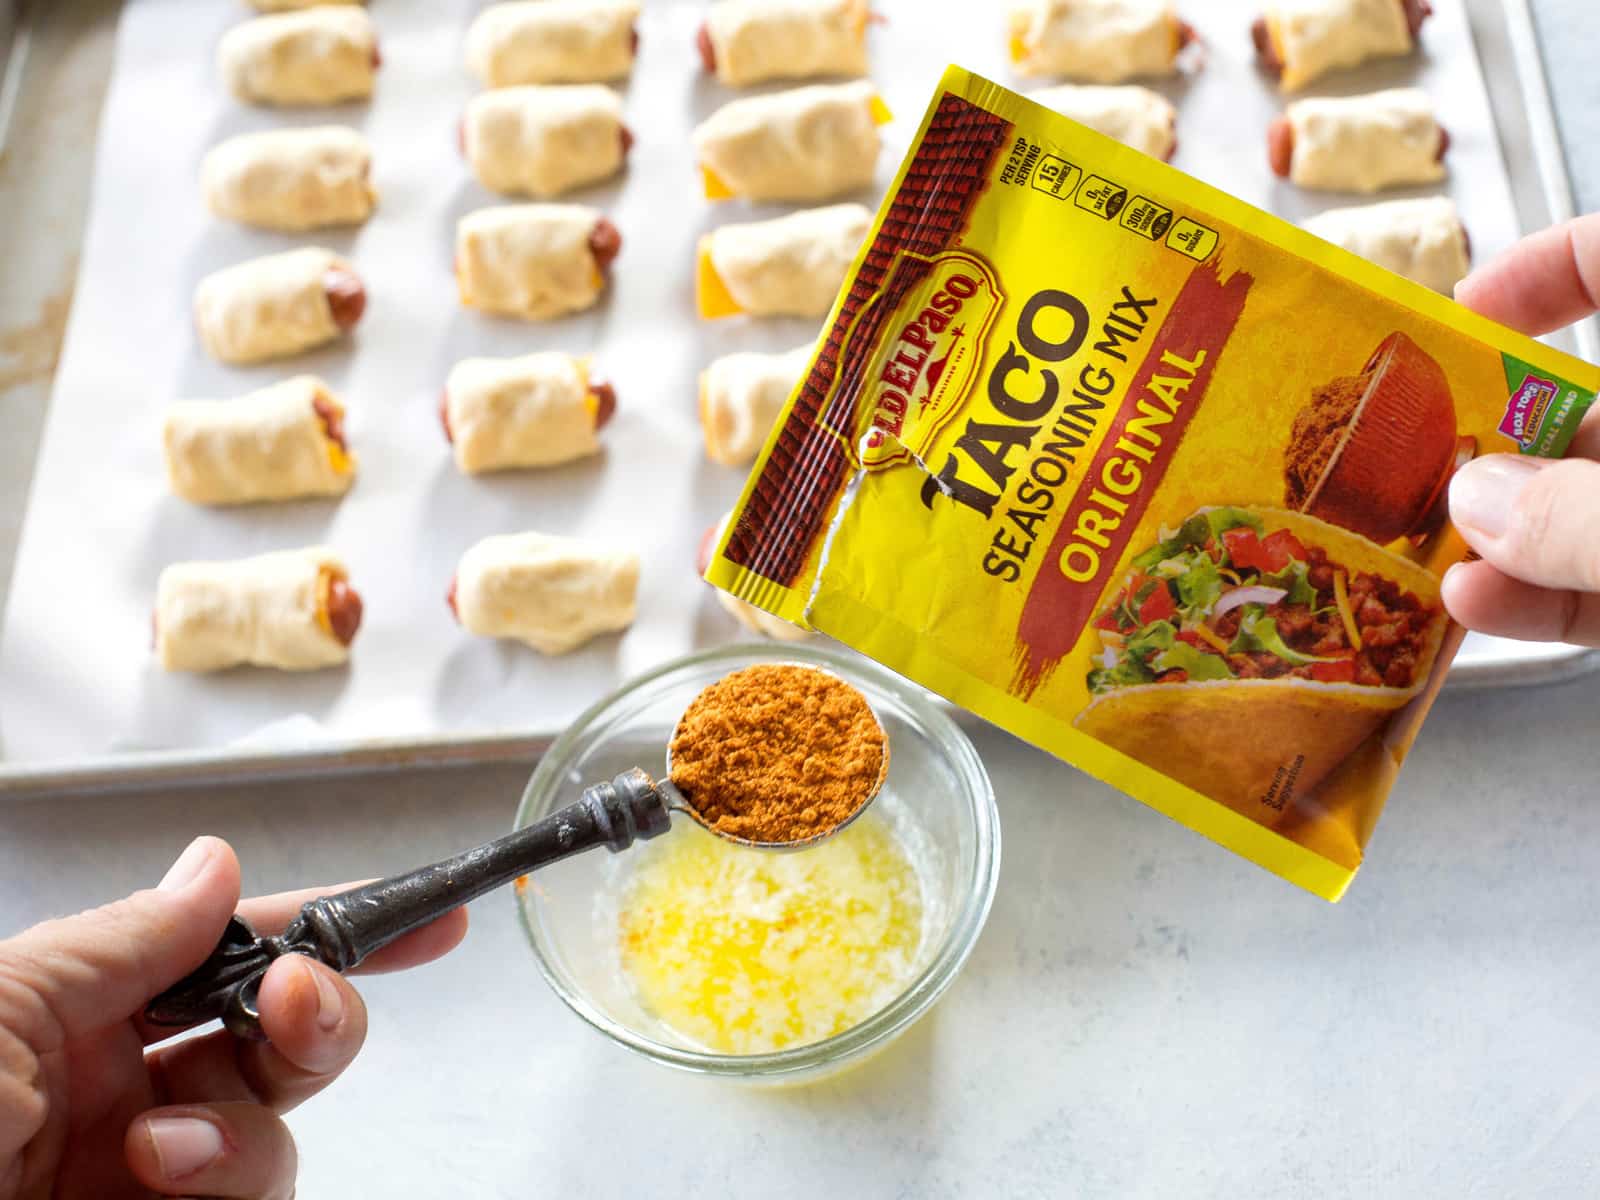 Taco Pigs in a Blanket - a Mexican twist on the classic appetizer. Make a toppings bar so everyone can top their own. the-girl-who-ate-everything.com